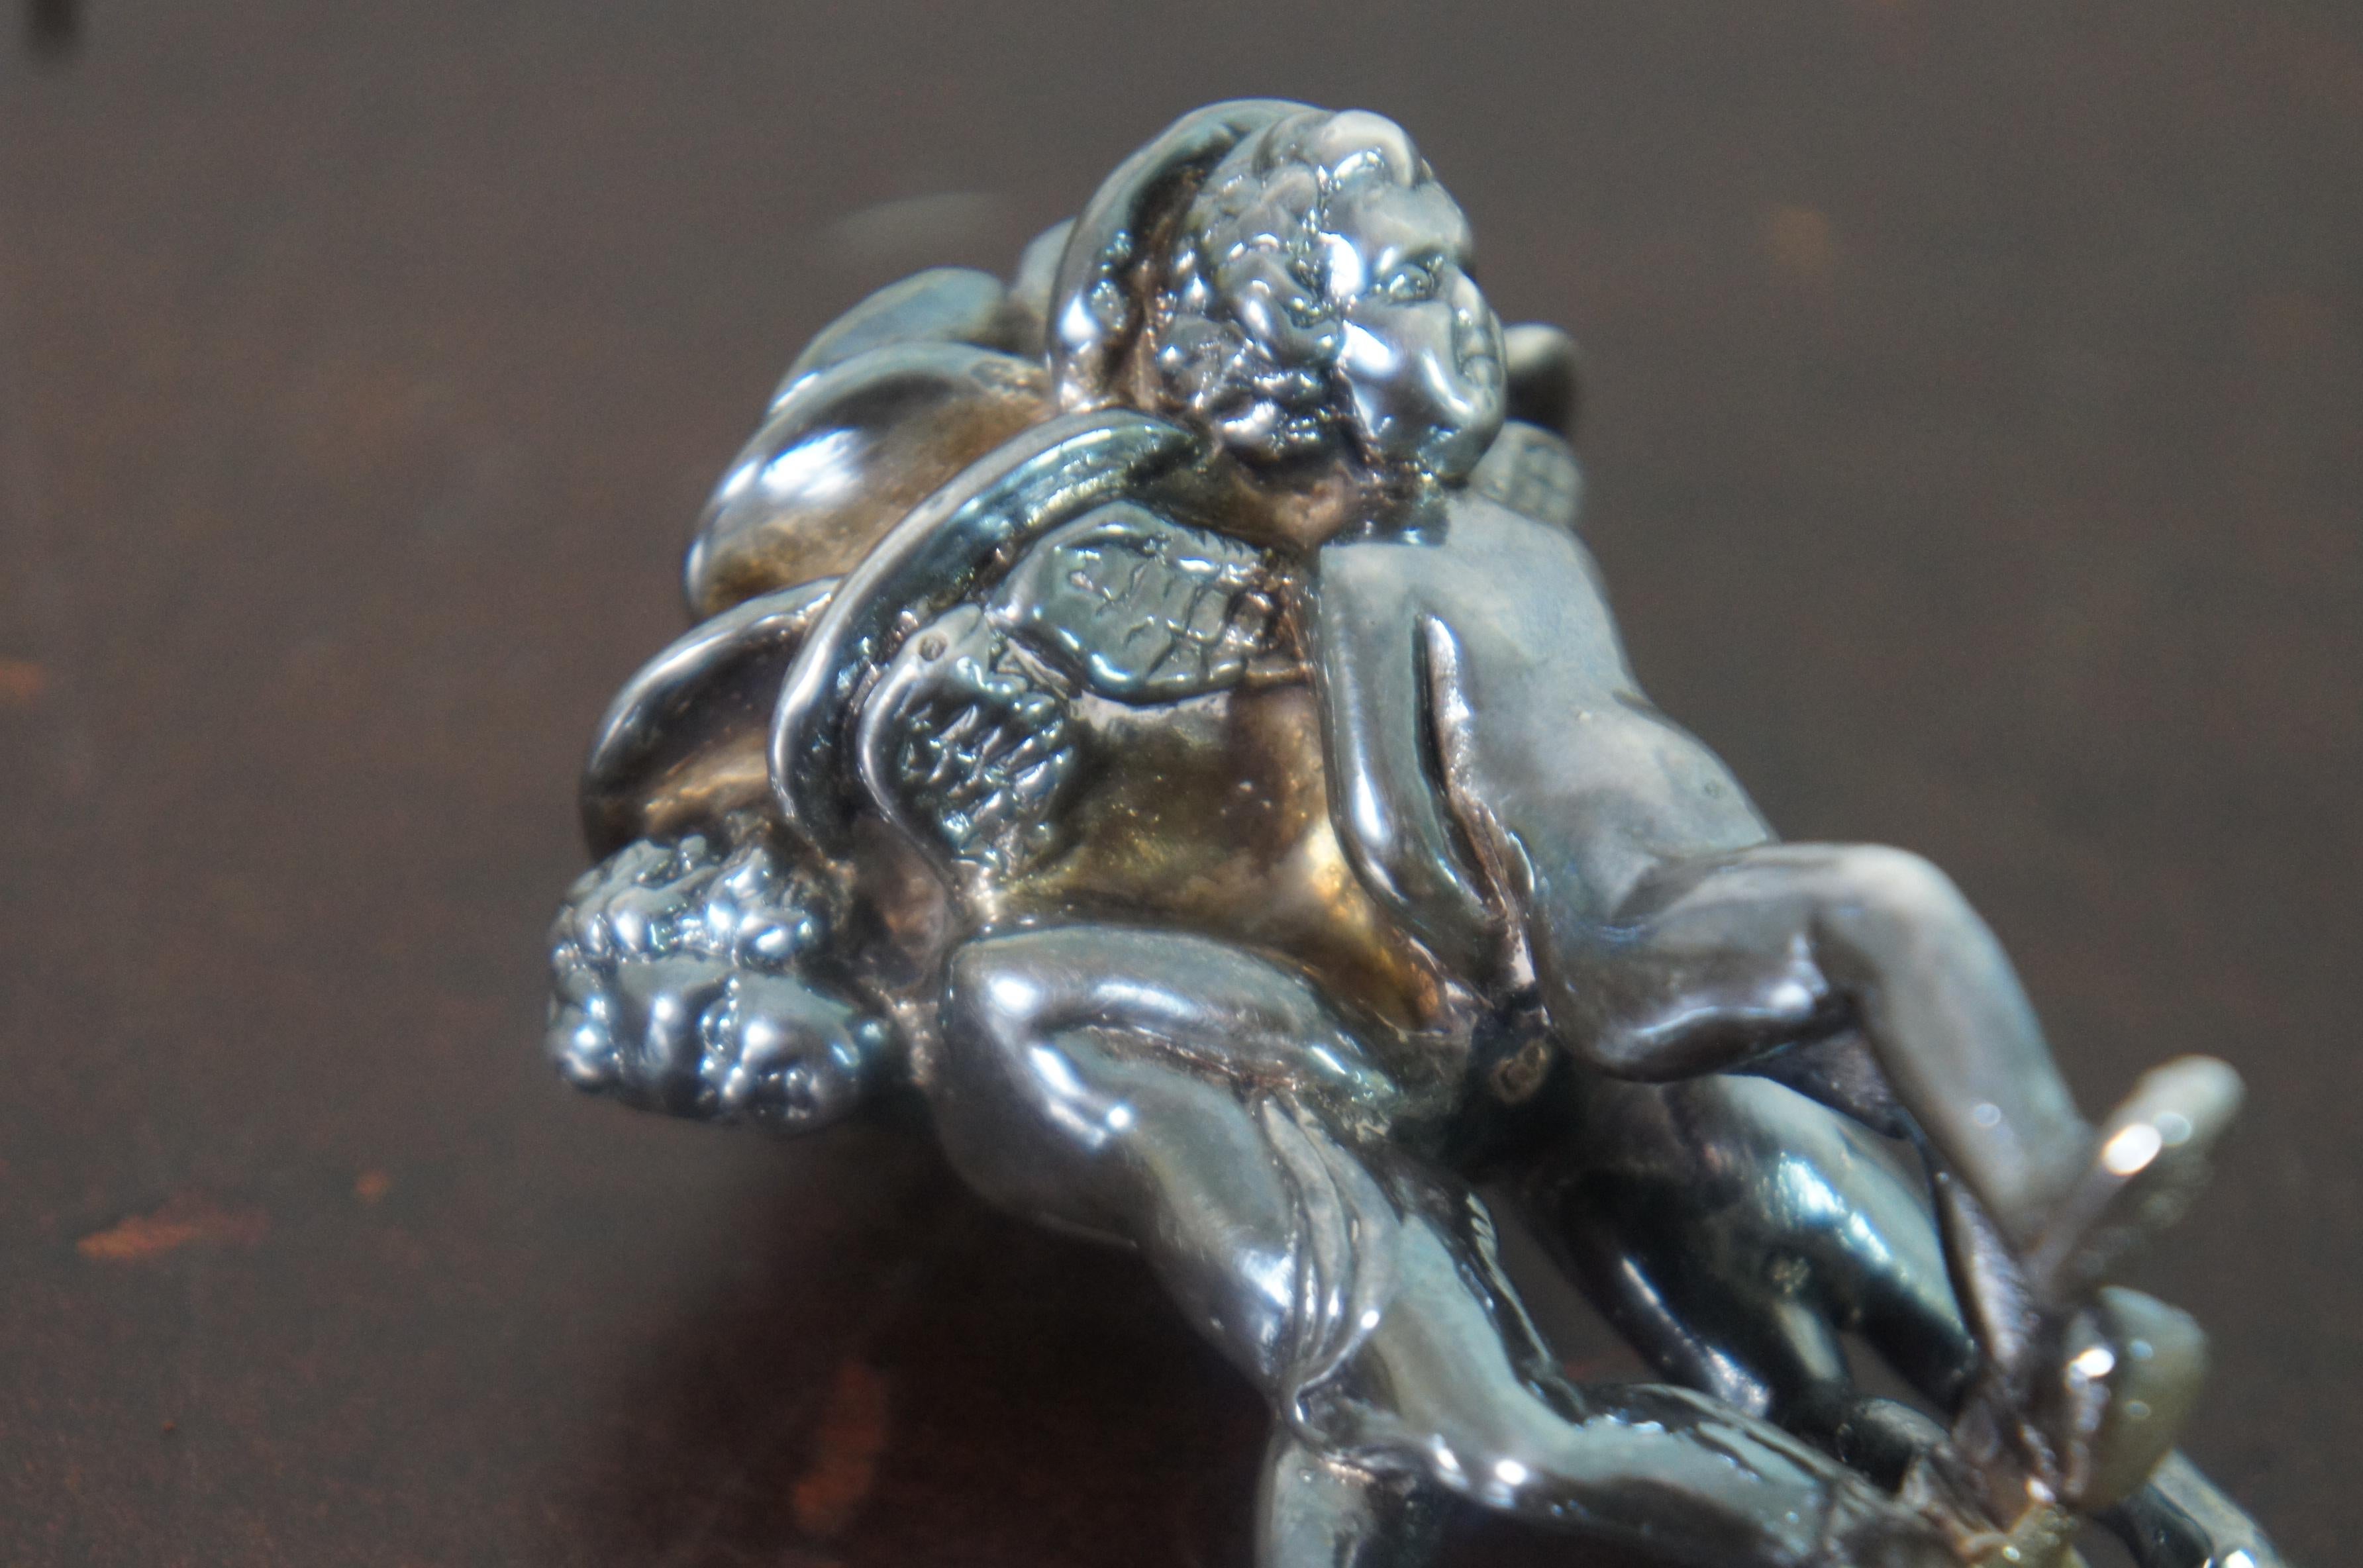 2 Vintage Sterling Silver 925 Cherub Angel Putti Rose Taper Candle Holders 2.5